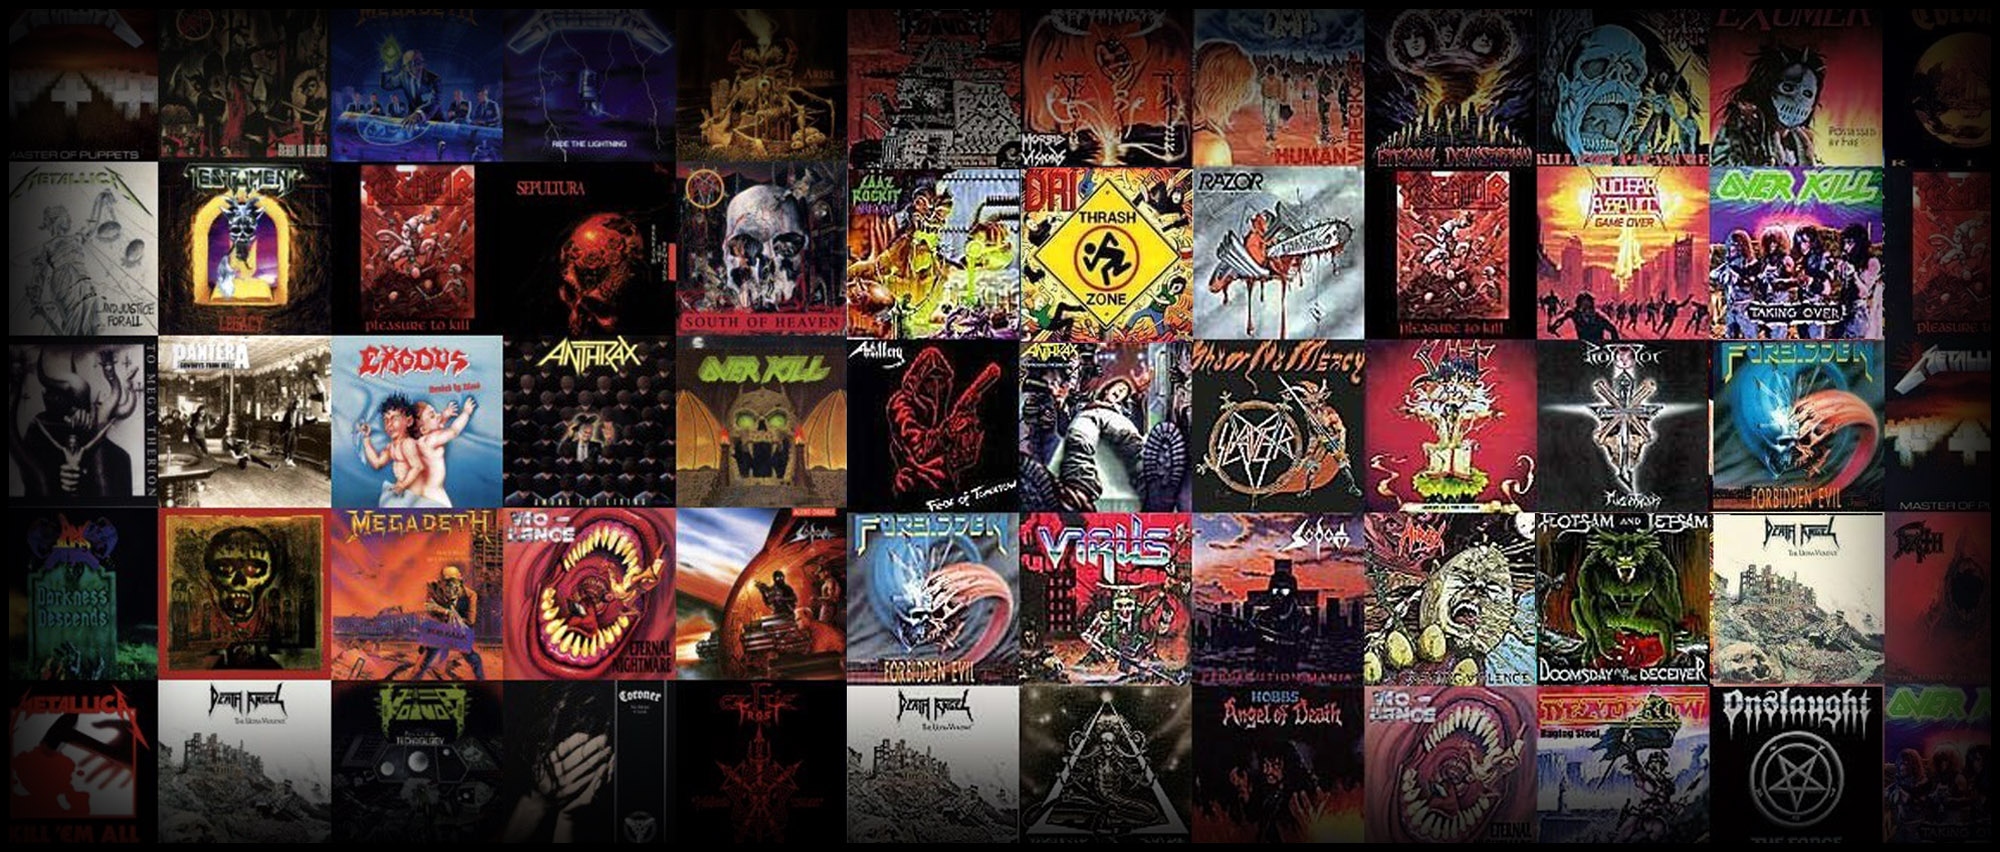 top metal albums of all time